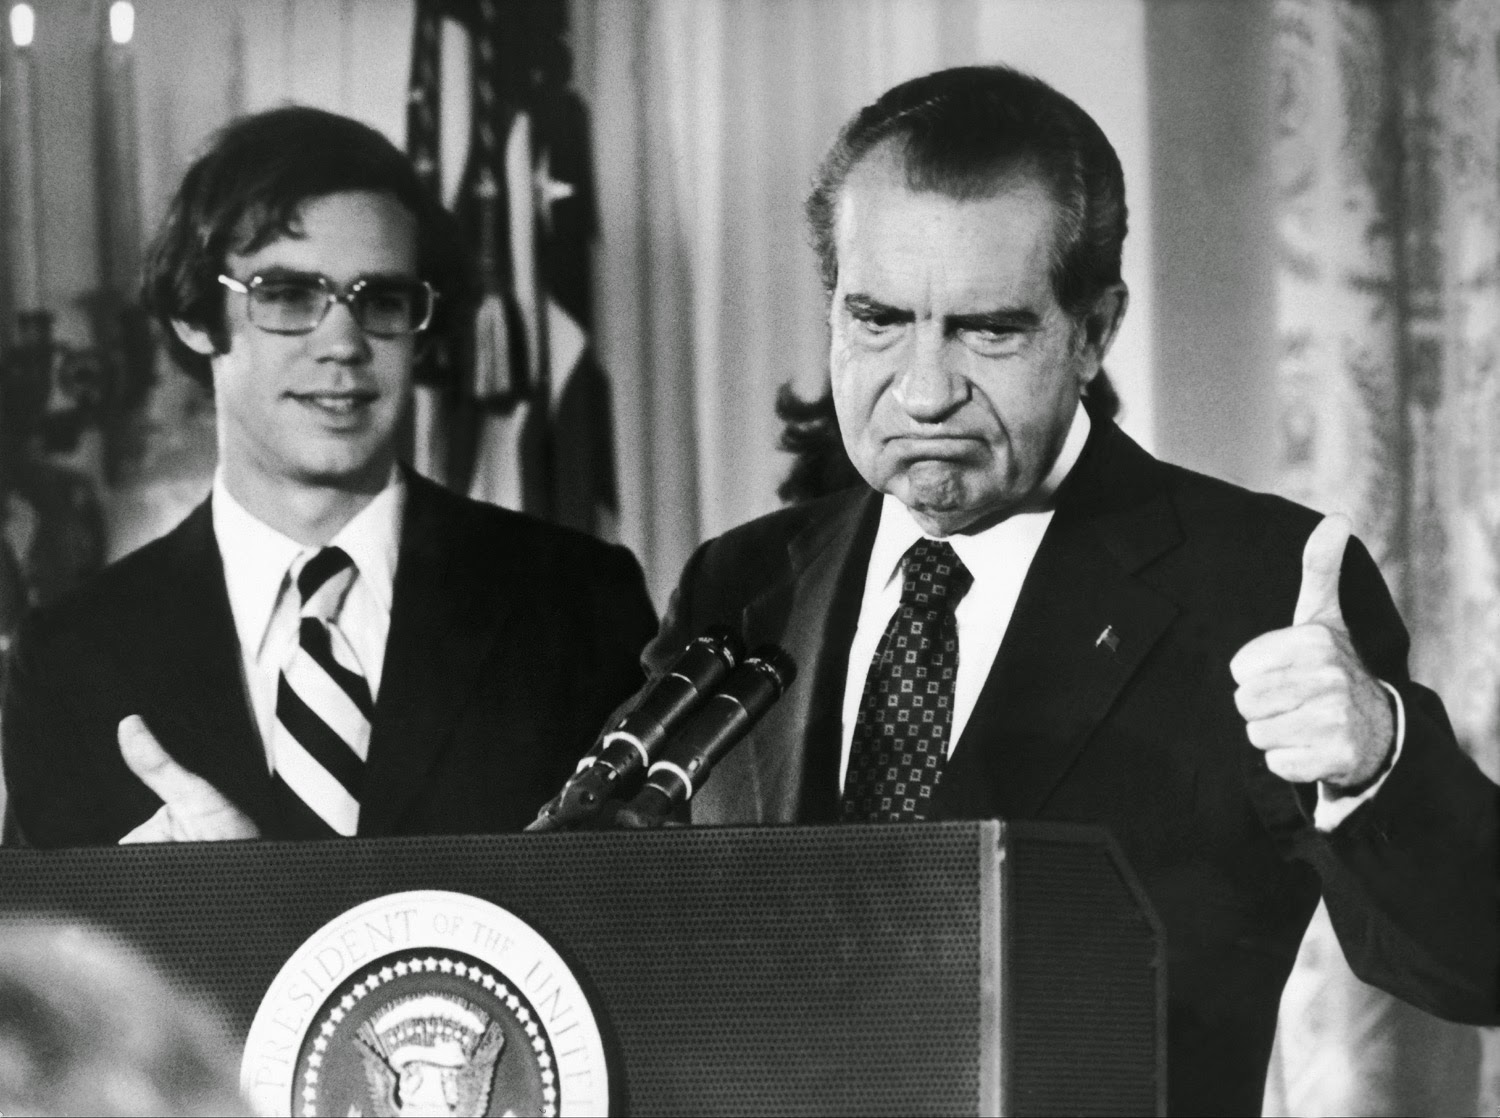 Watergate: The Questions Continue